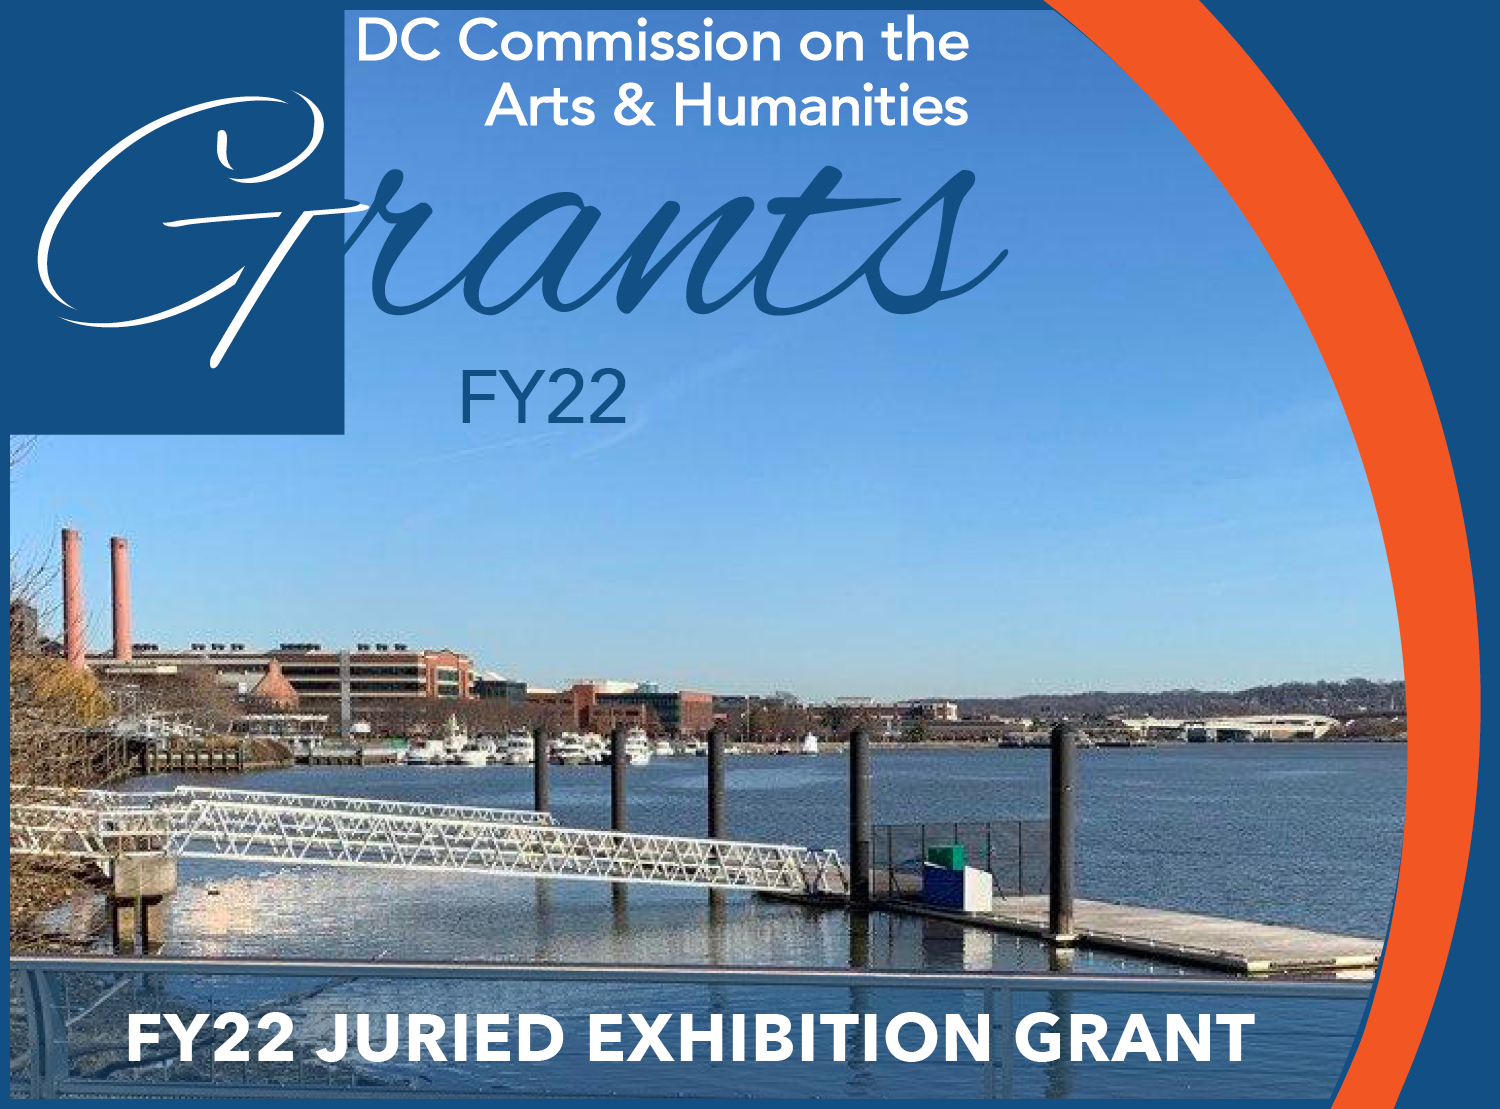  Juried Exhibition Grant